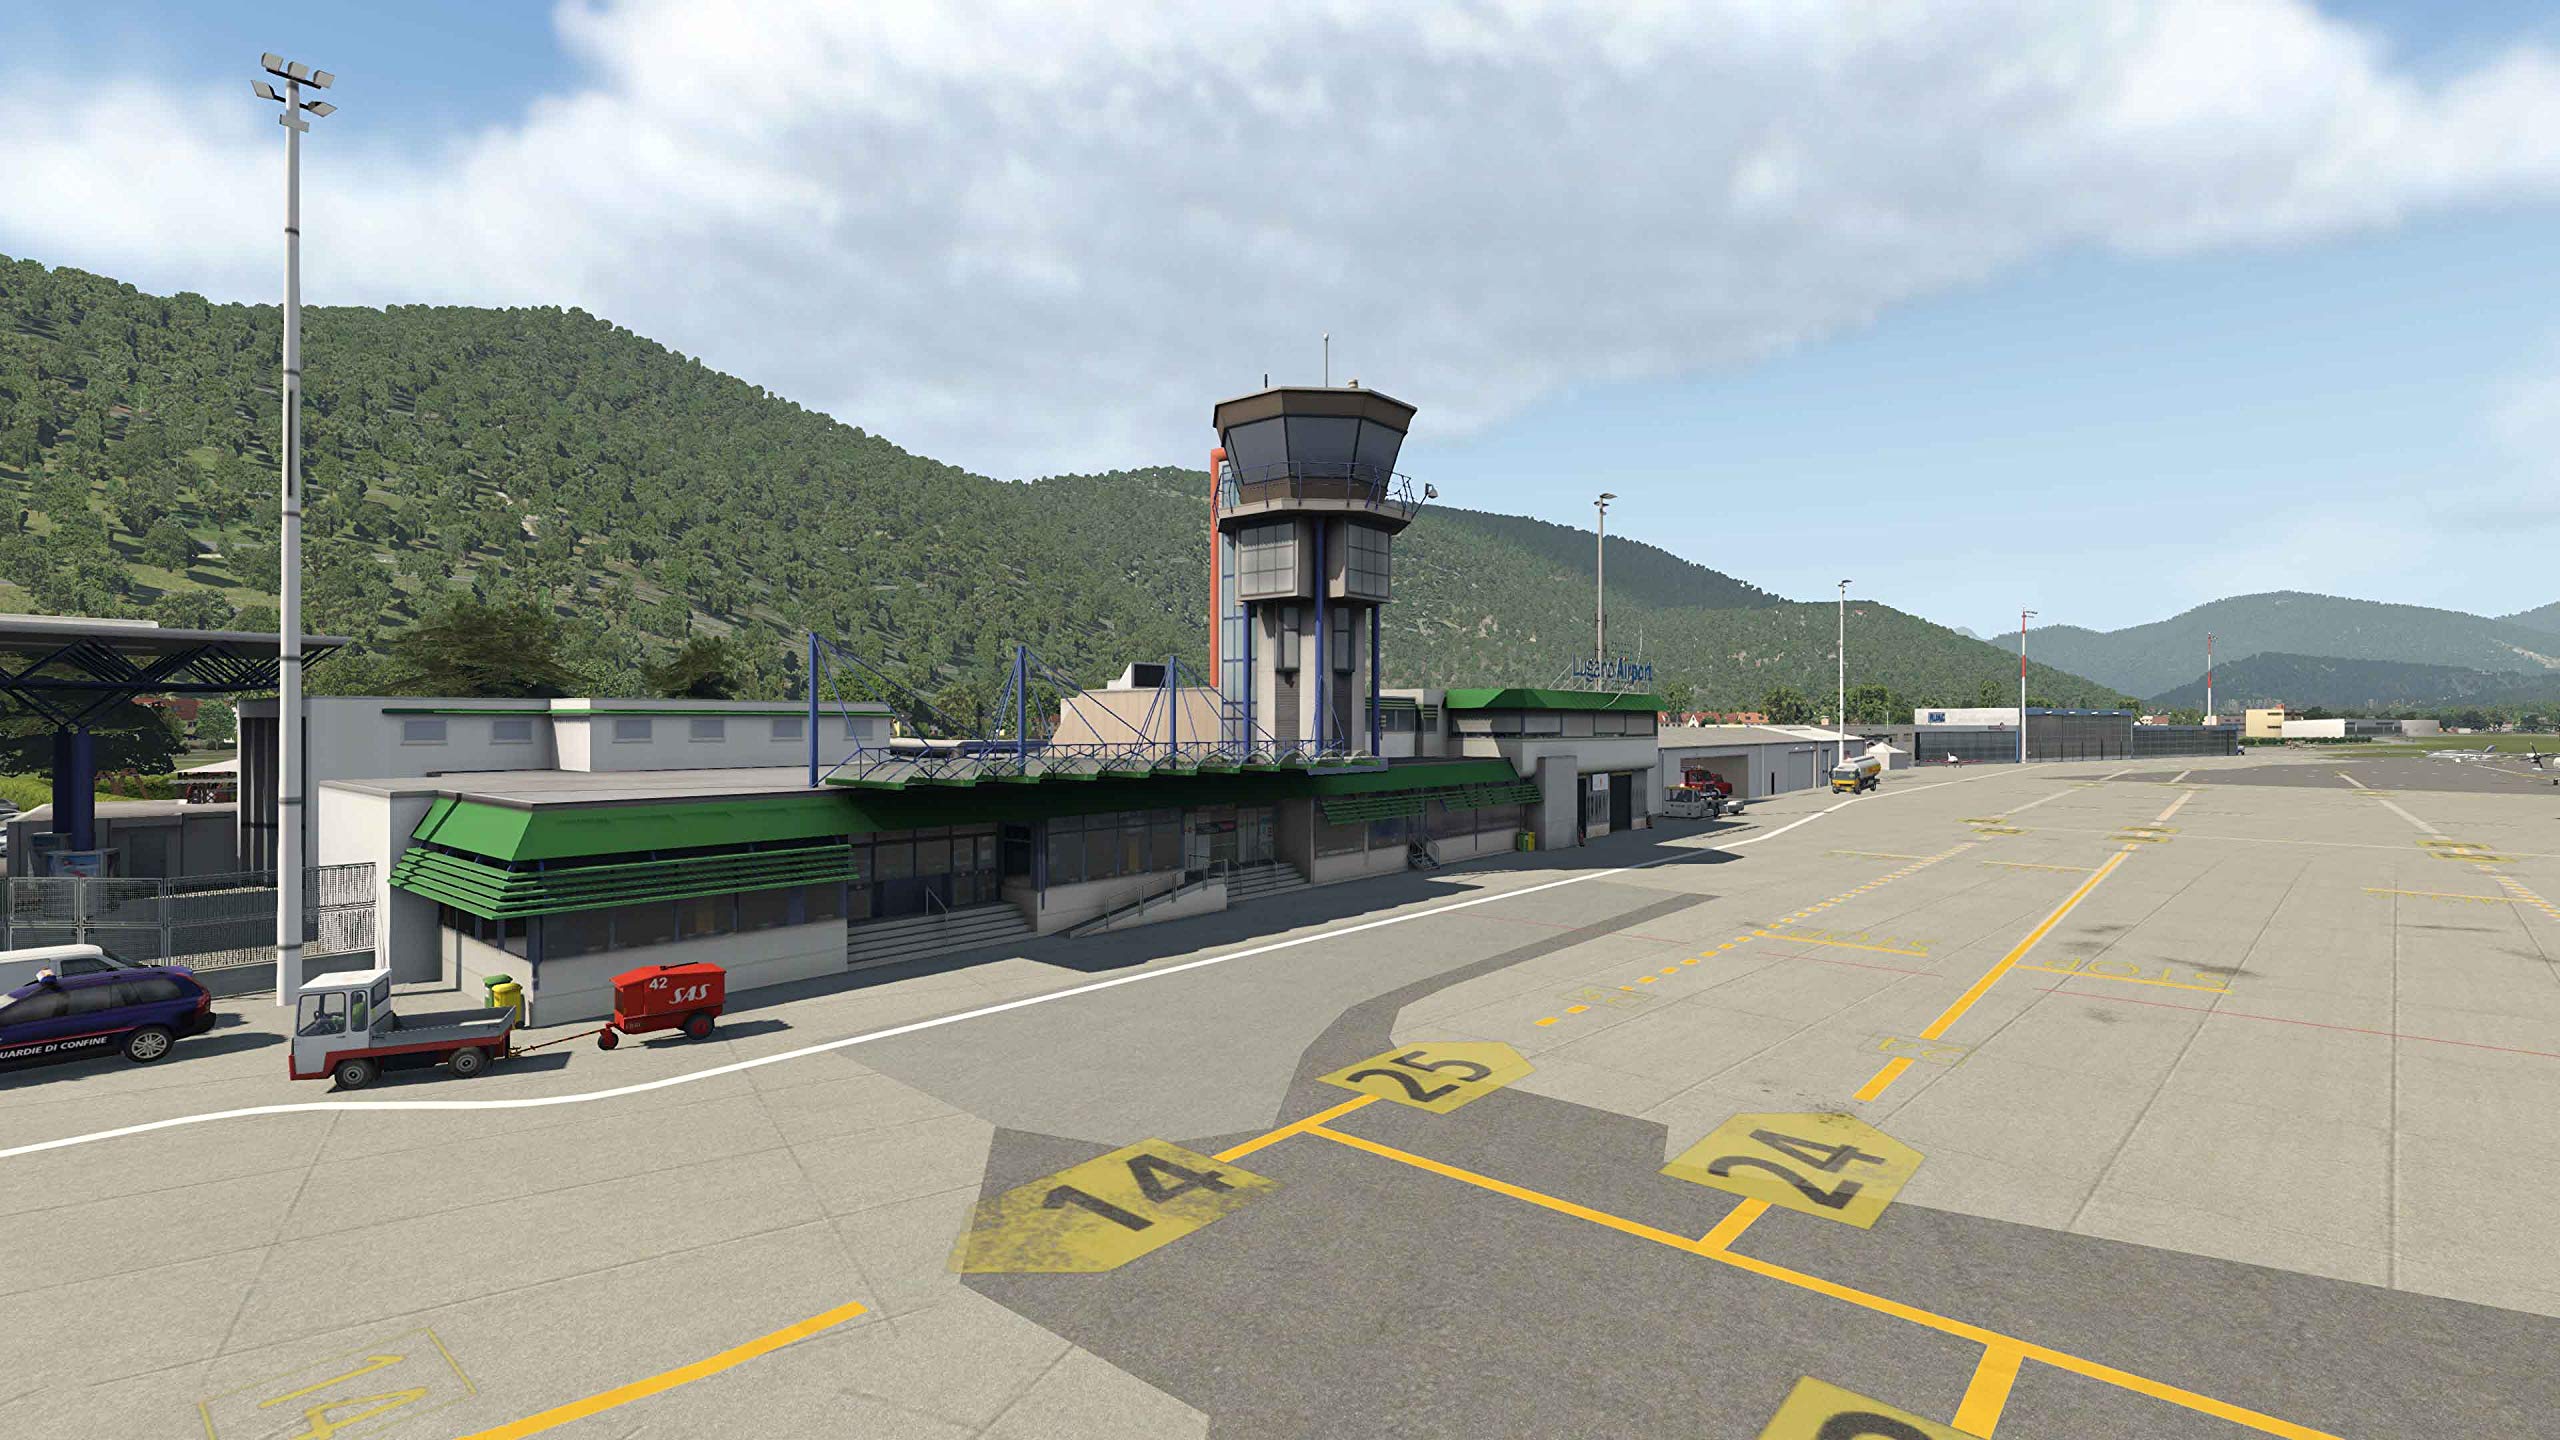 Xplane 11 Global and Aerosoft 6 Airports Collection PC DVD